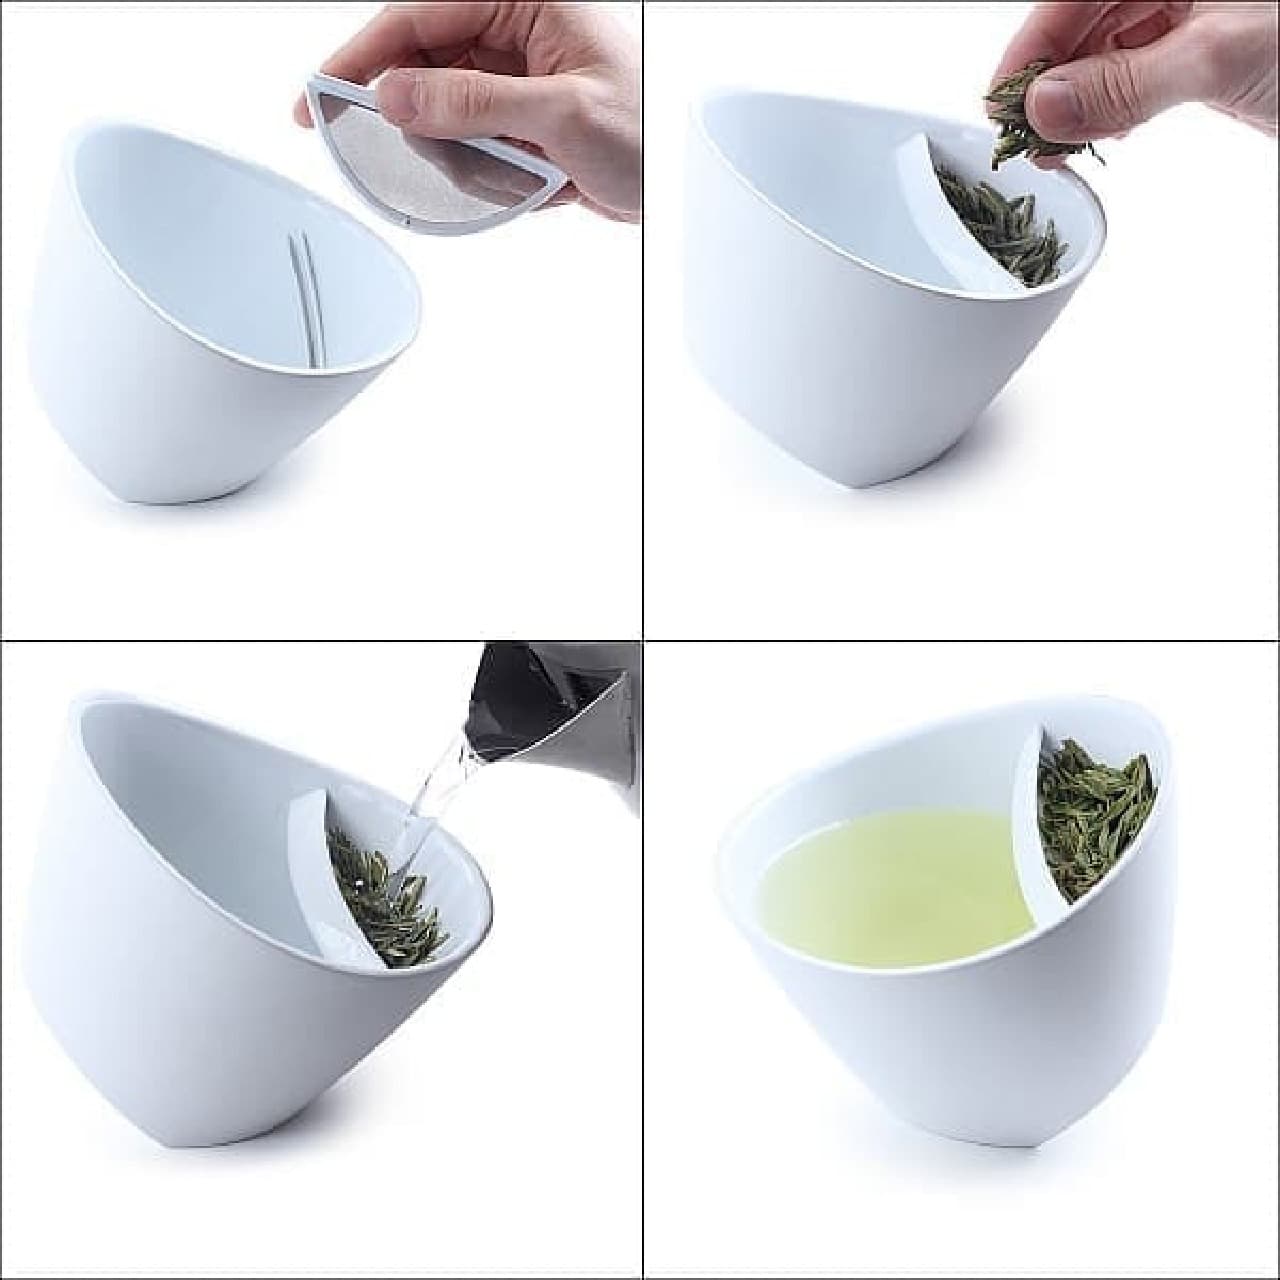 How TIPPING TEACUP works Simple and beautiful structure